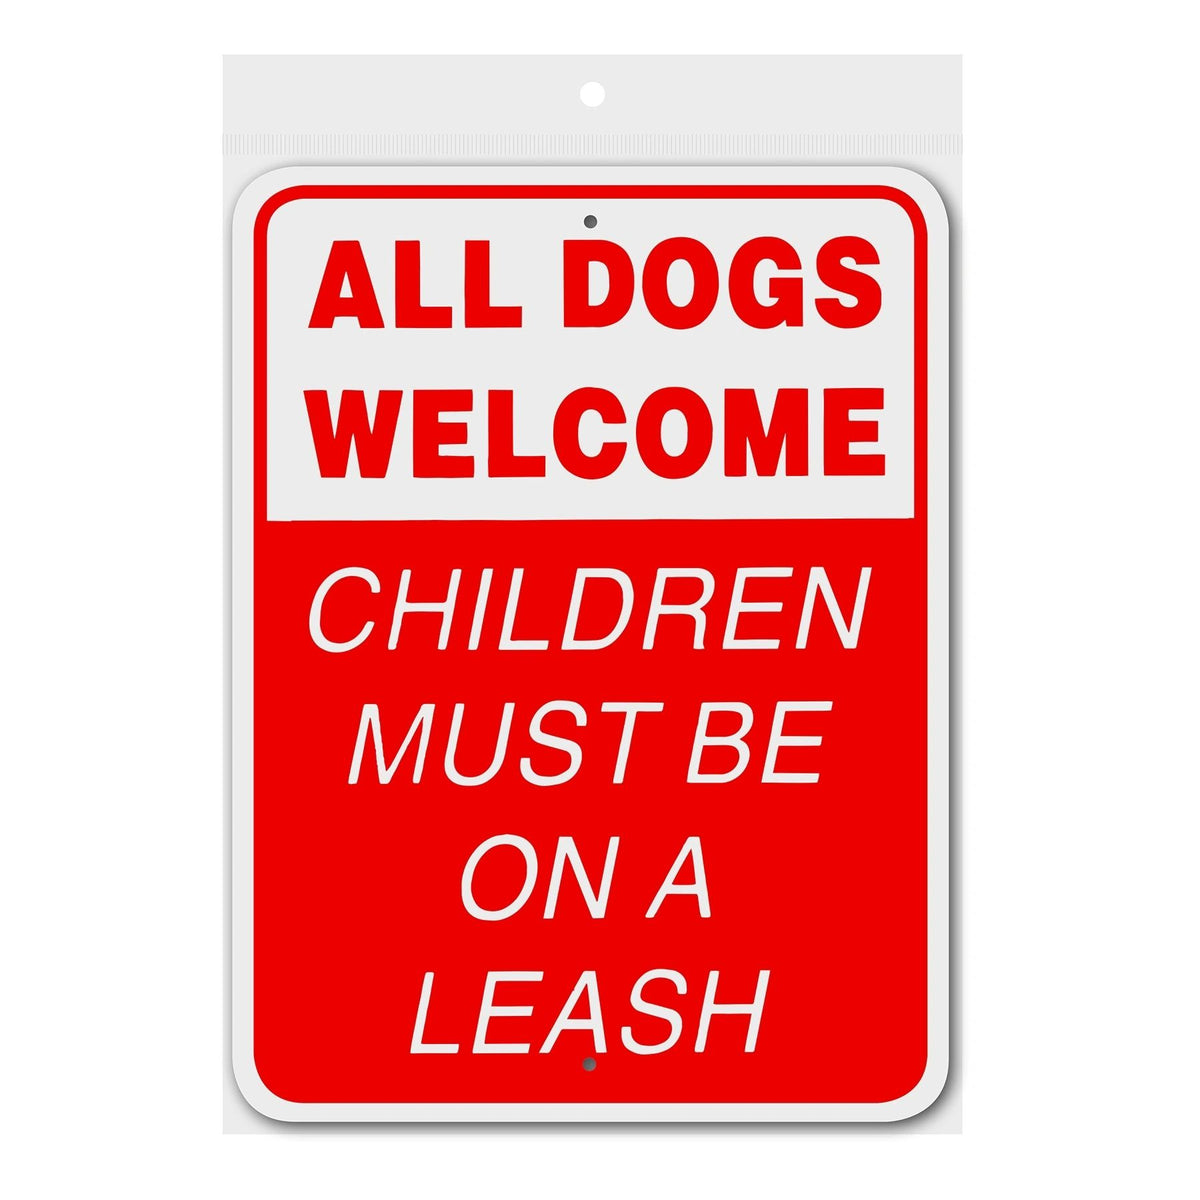 All Dogs Welcome Children Must Be On A Leash Sign Aluminum 9 in X 12 in #3245314